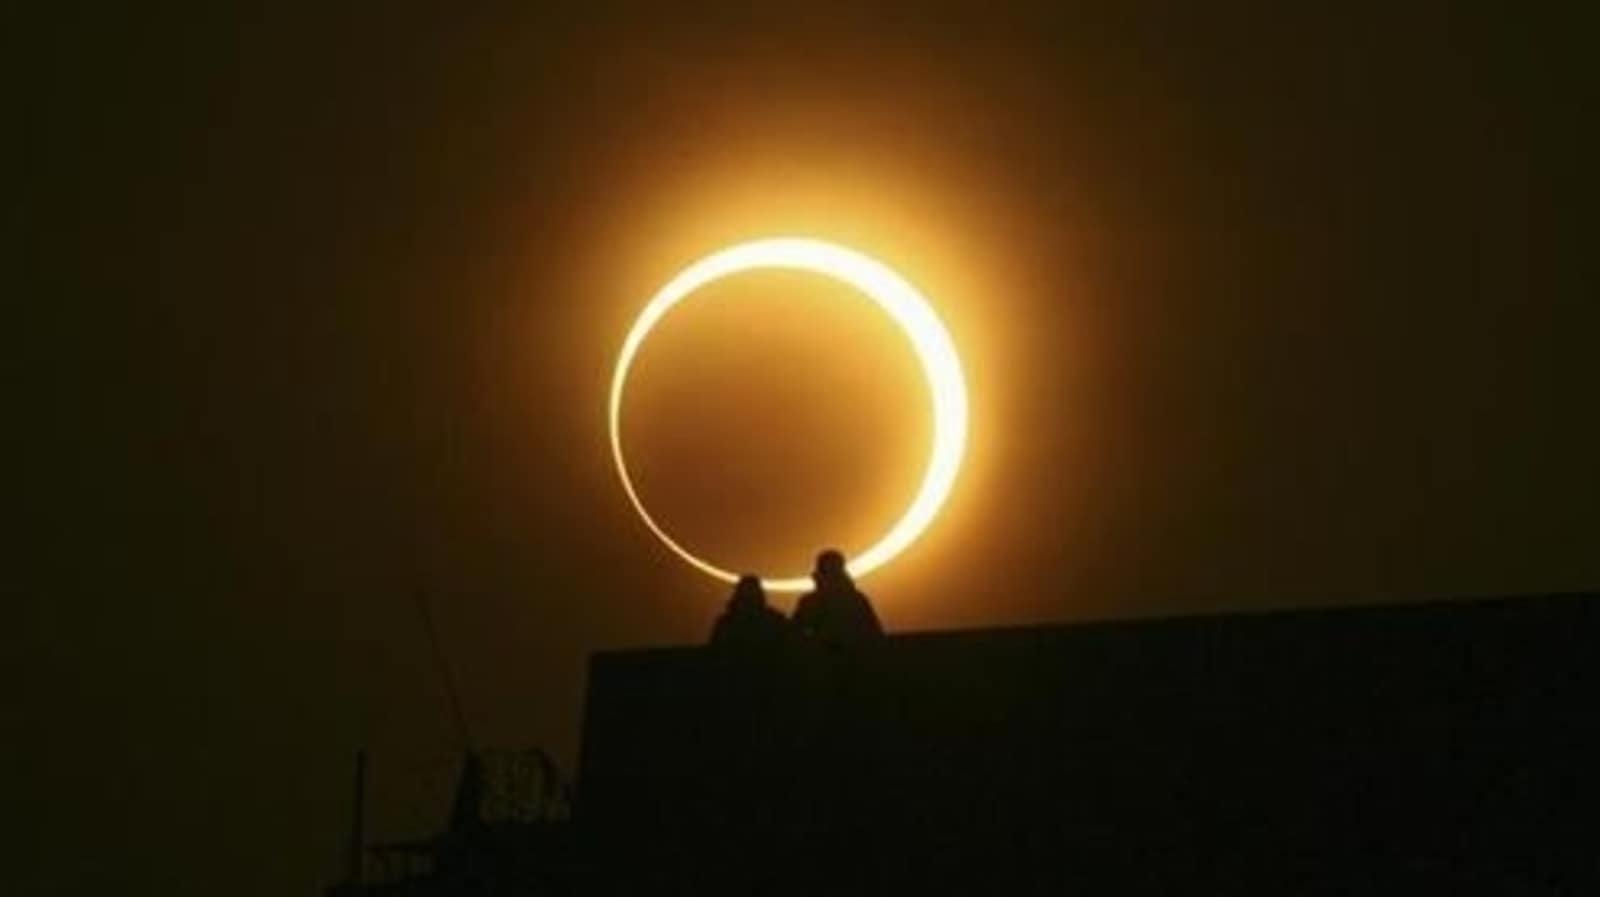 Eclipse blindness How watching solar eclipse can damage your eyes